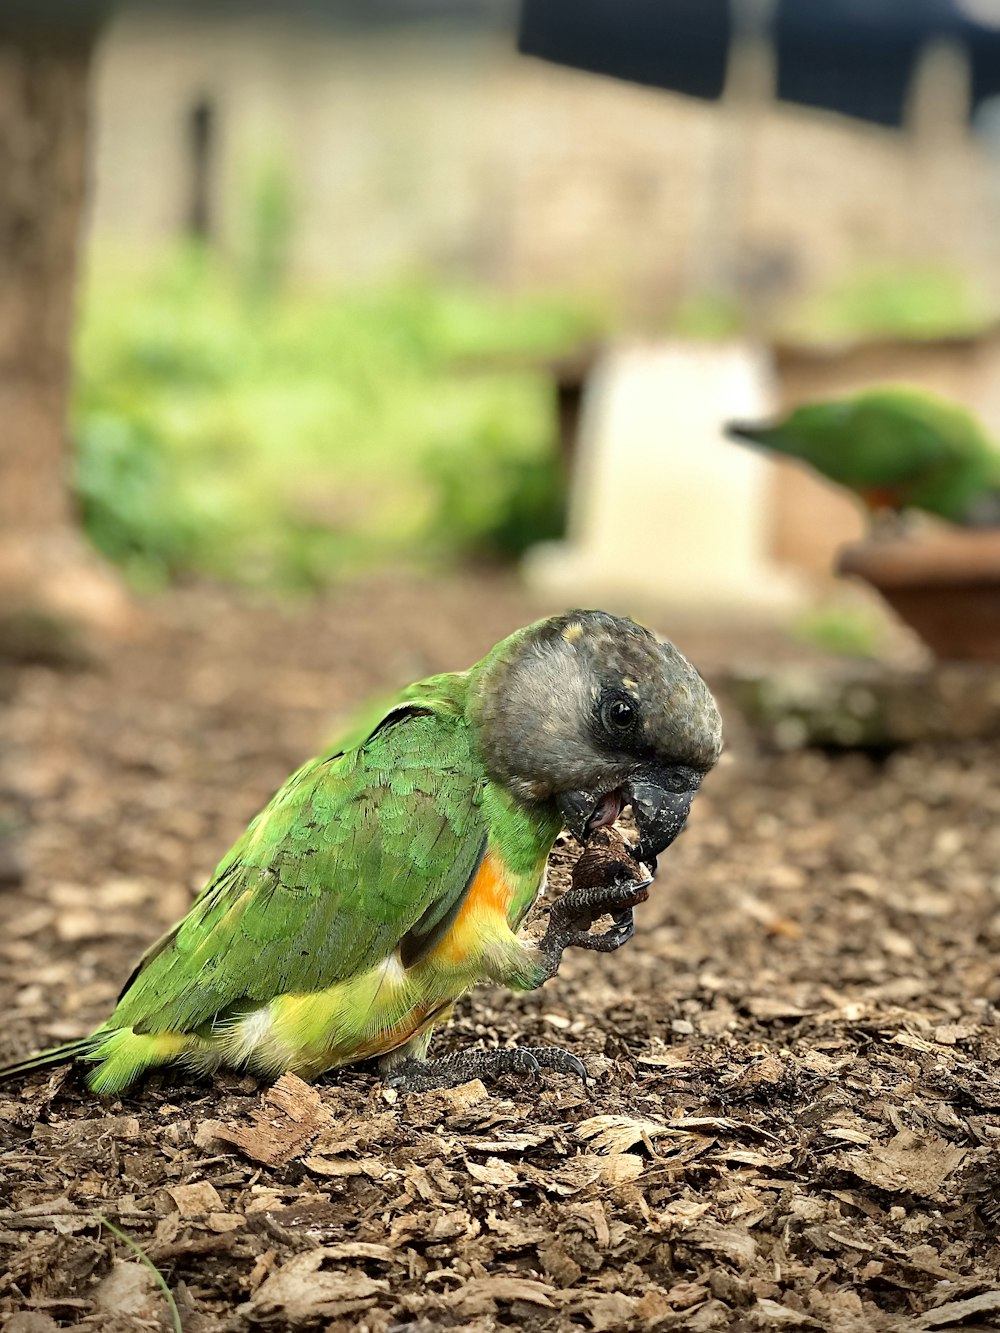 a green and yellow bird eating something in its mouth